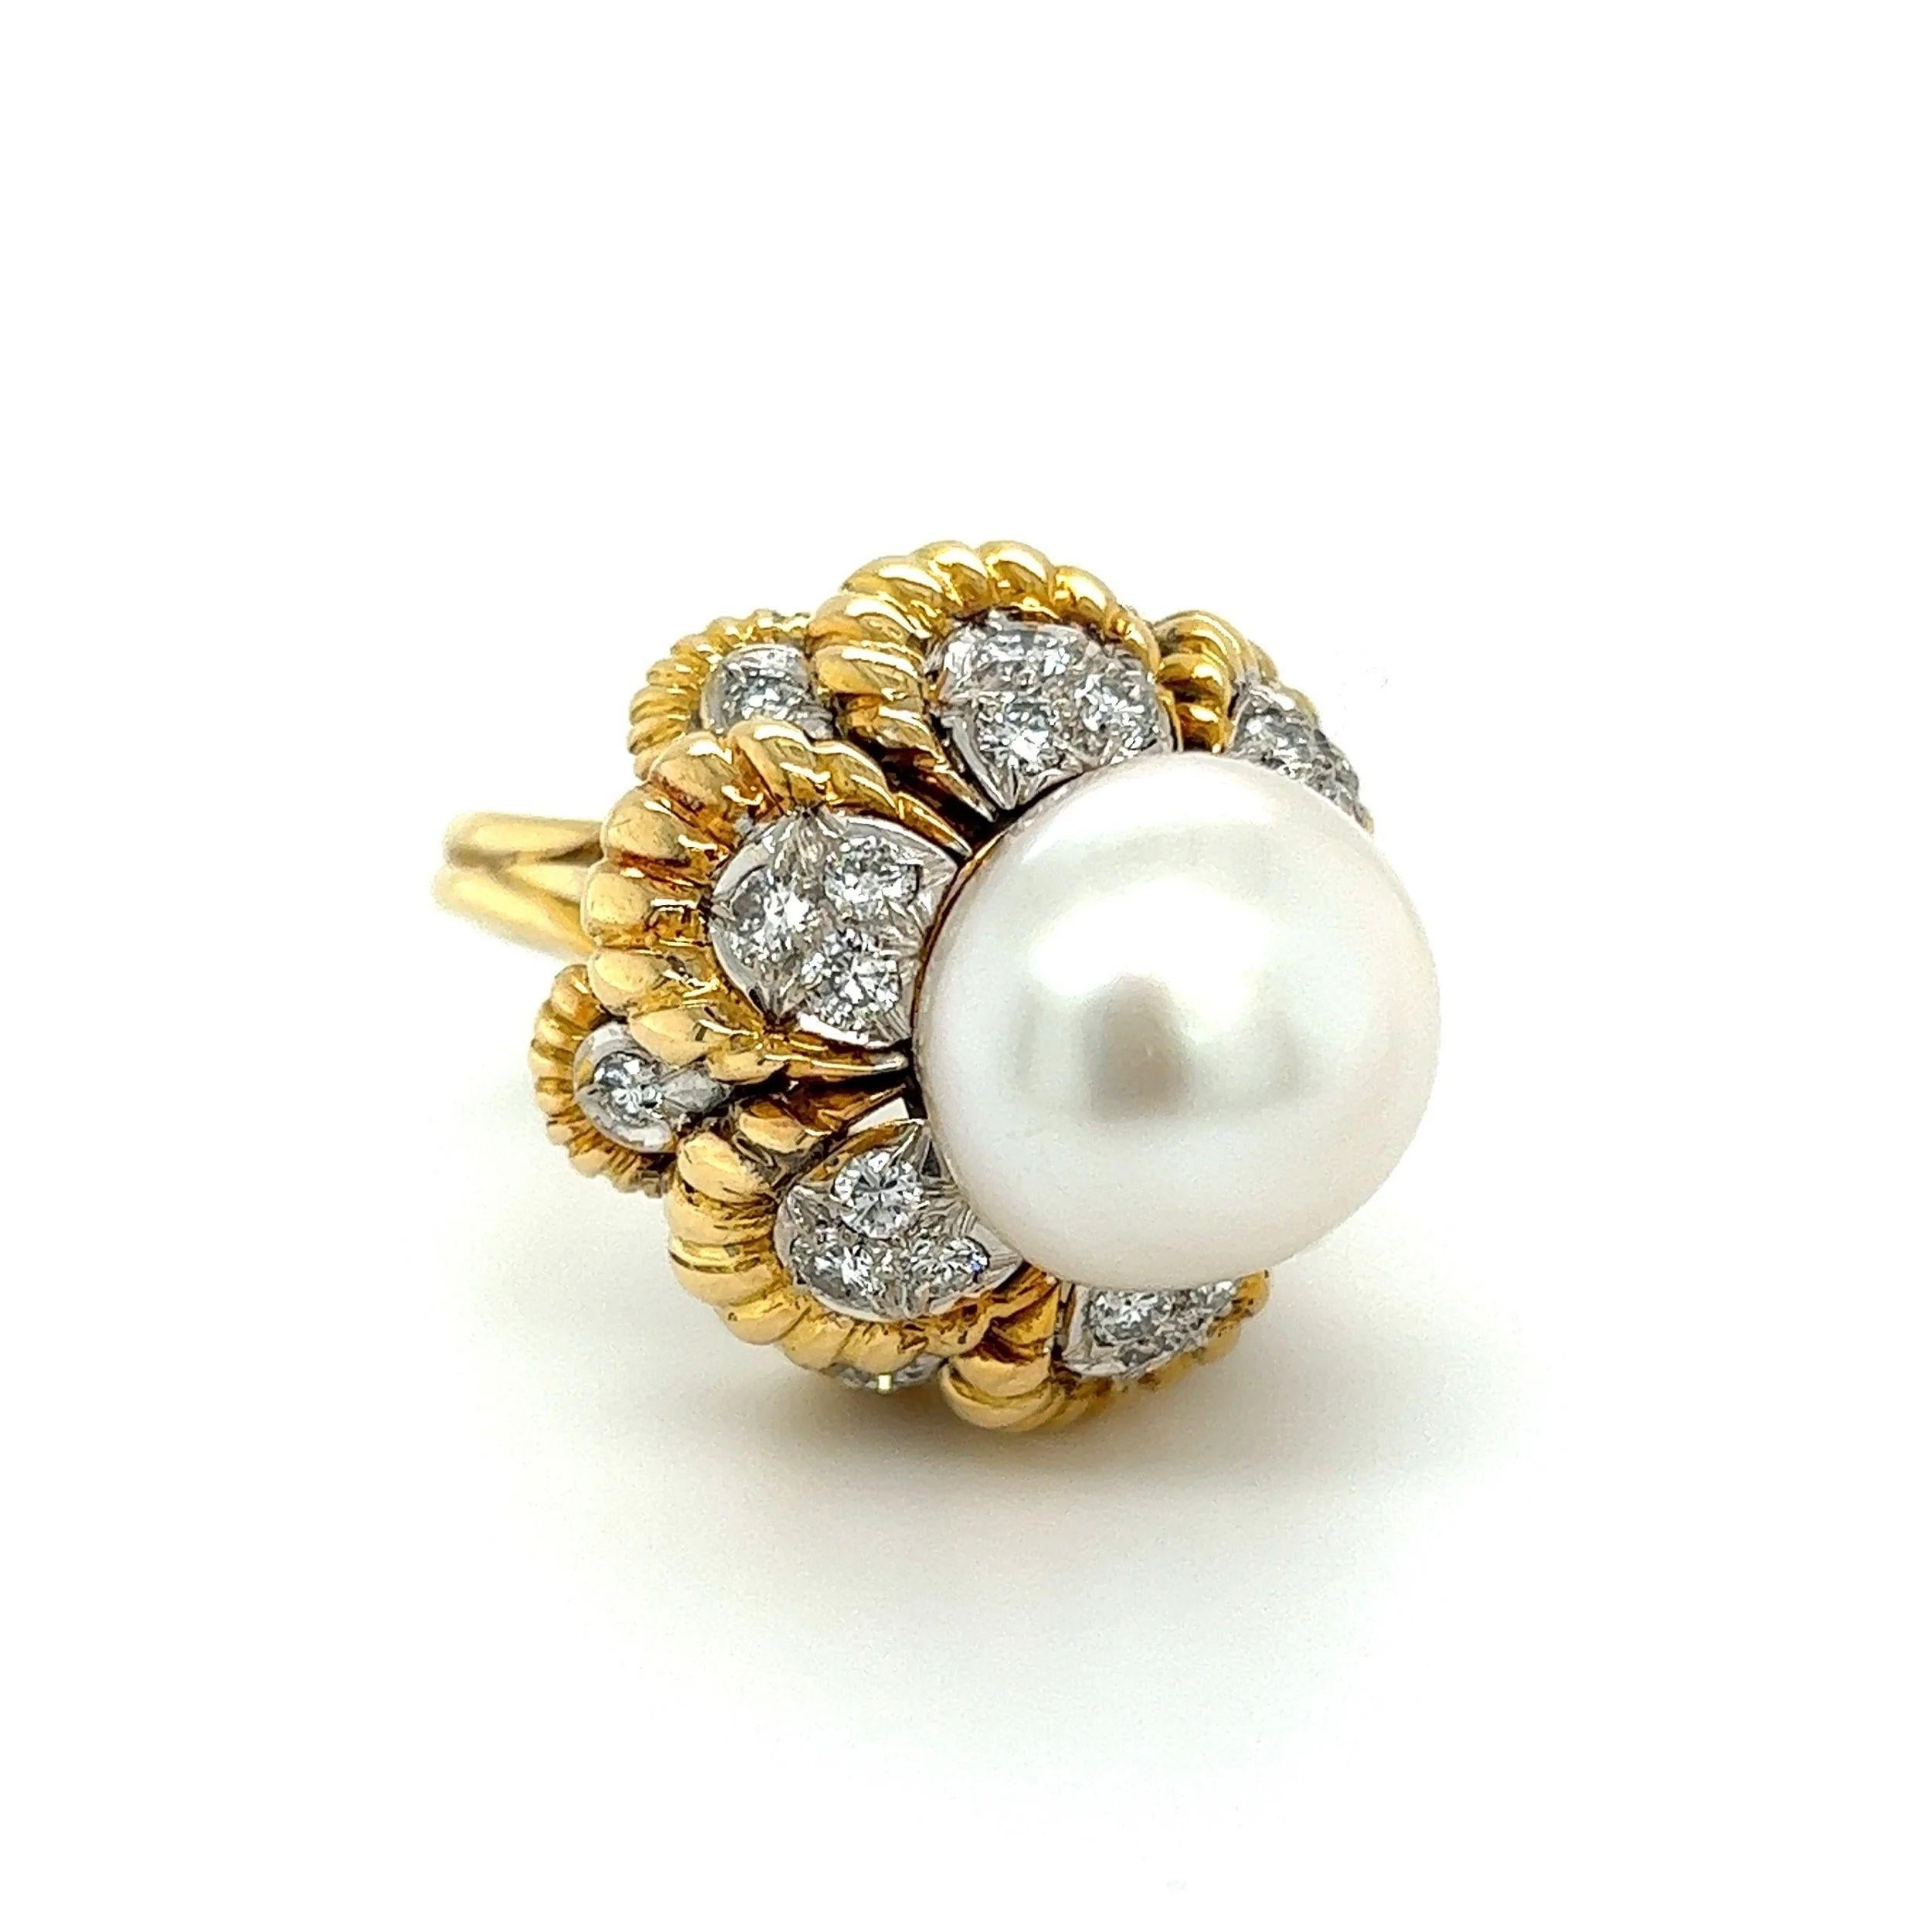 Simply Beautiful! Finely detailed Pearl and Diamond 18K Gold Cocktail Ring. Centering a securely nestled 14.3mm Pearl, artfully surrounded by Diamonds, weighing approx. 1.45 total carat weight. Approx. Dimensions 1.60” l x 0.96” w x 0.92” h. Hand